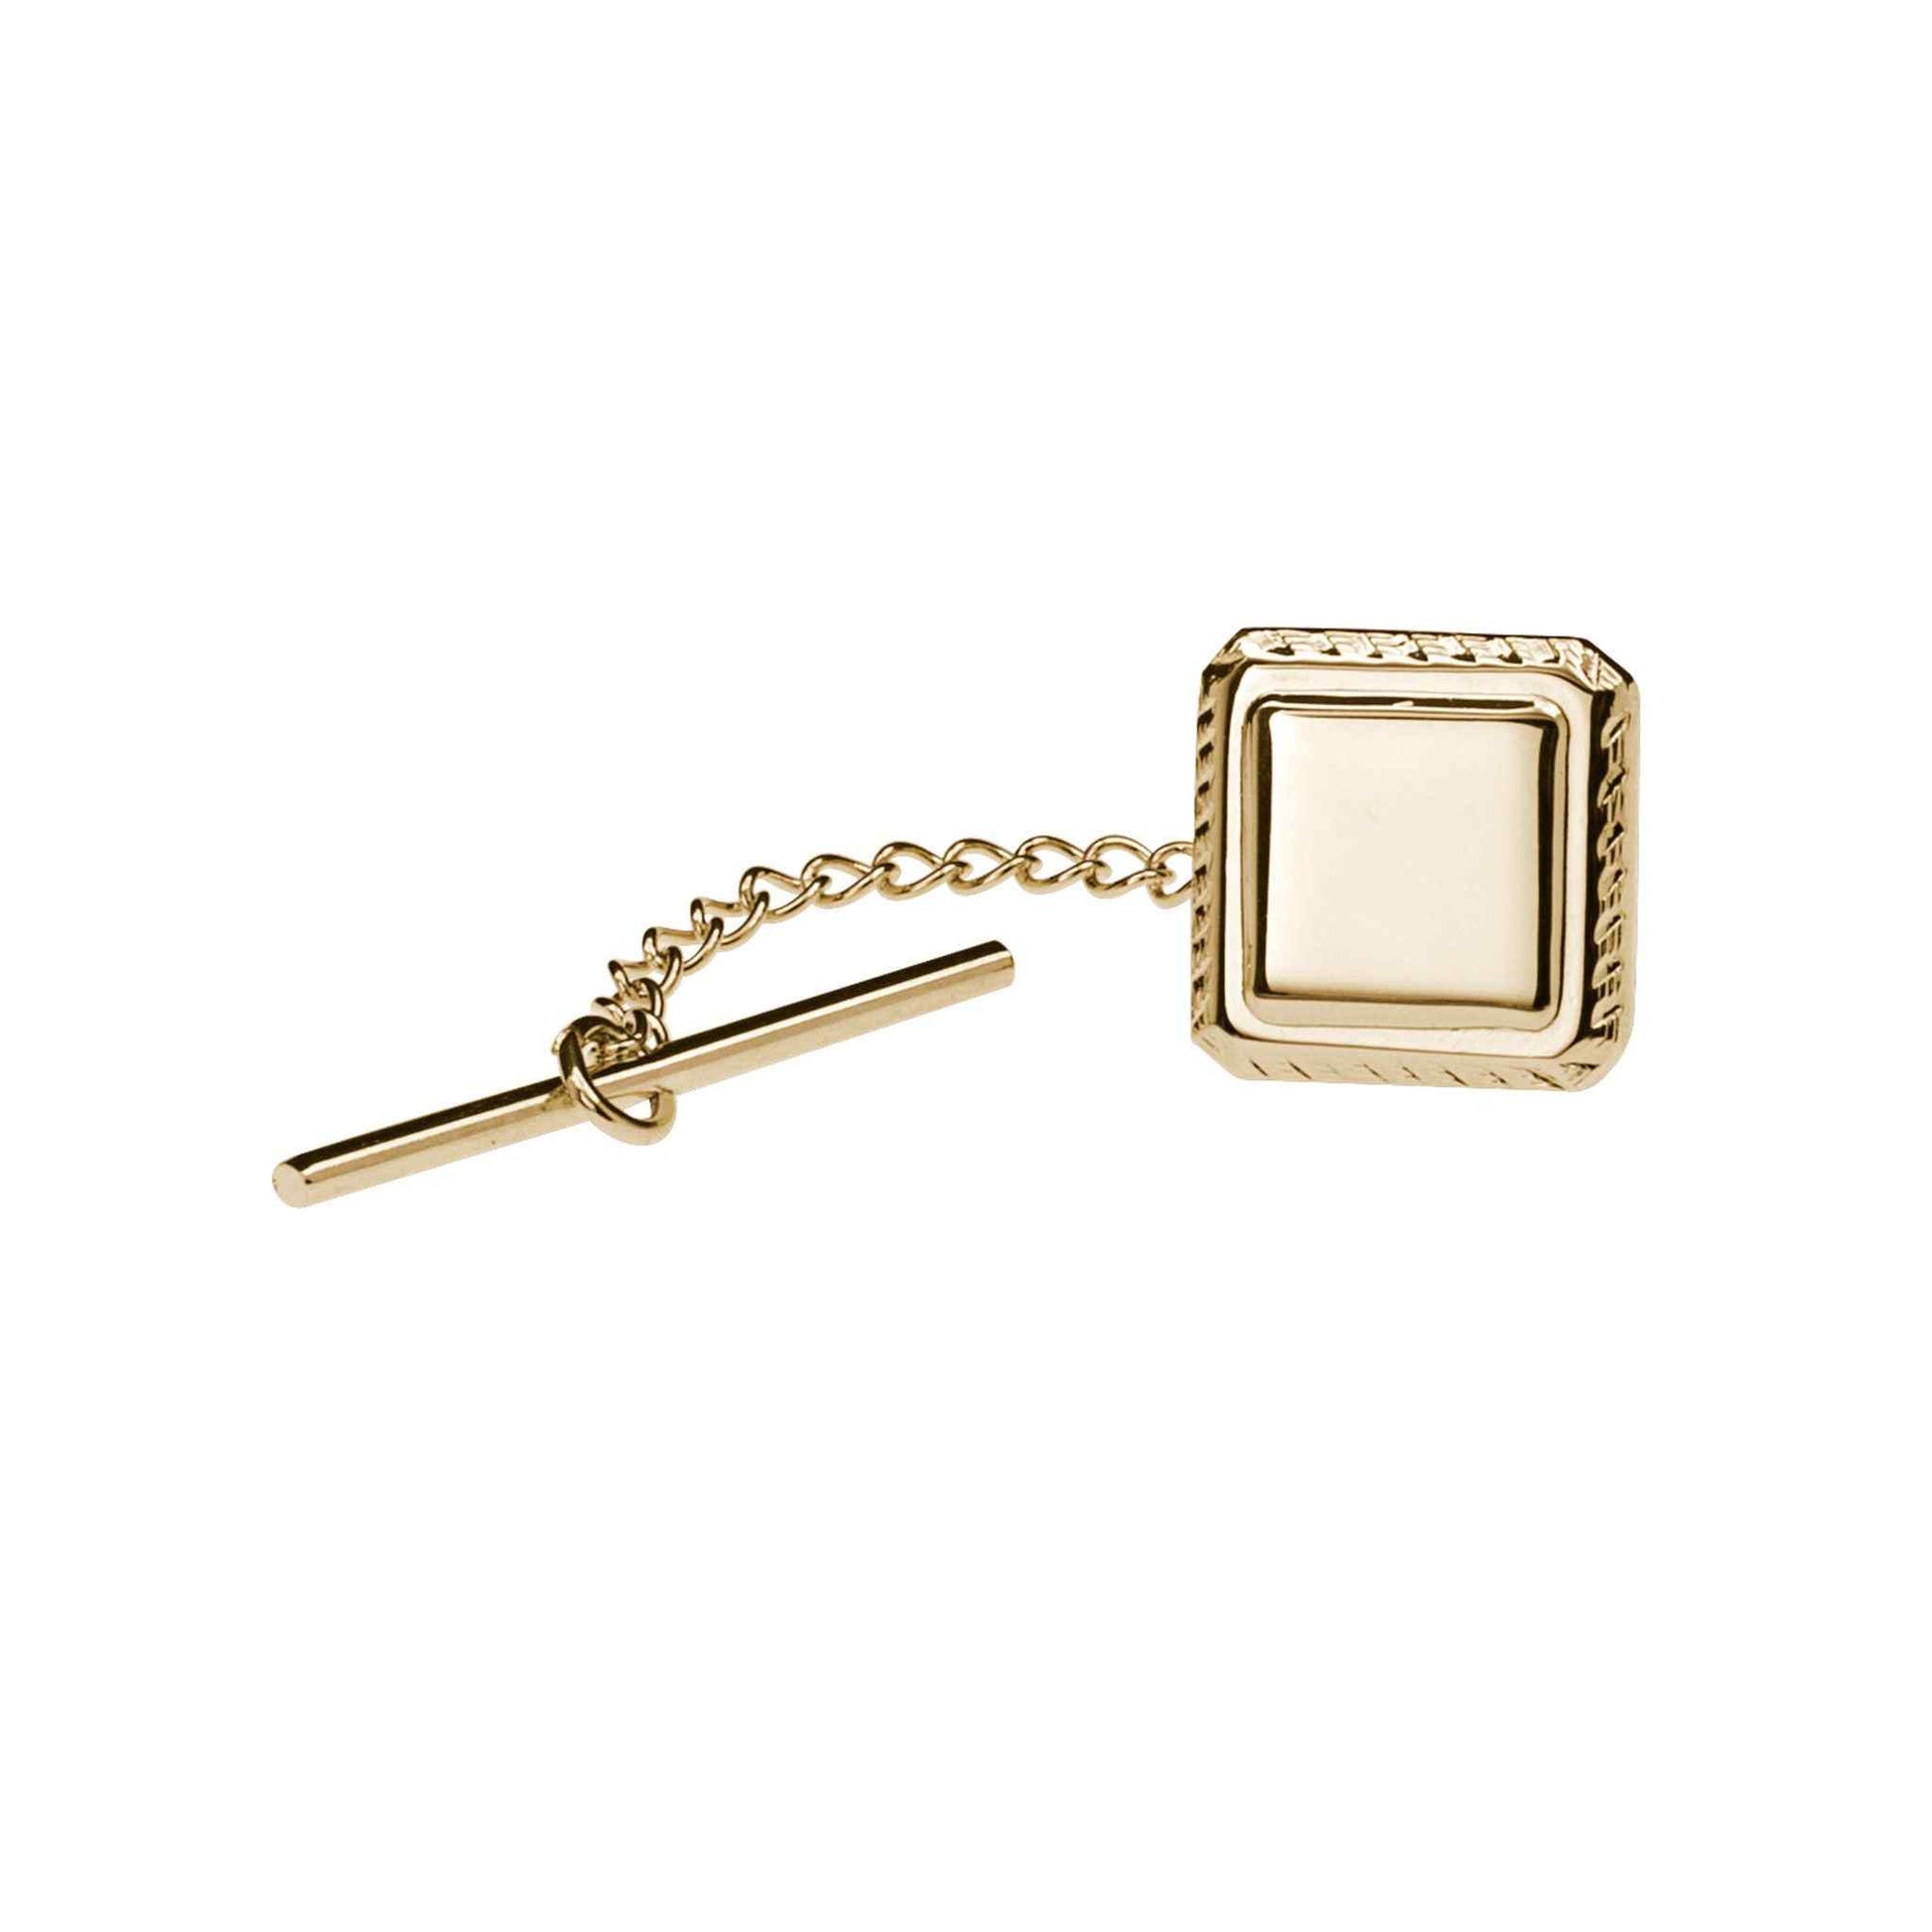 Square Tie Tack with Rope Edge